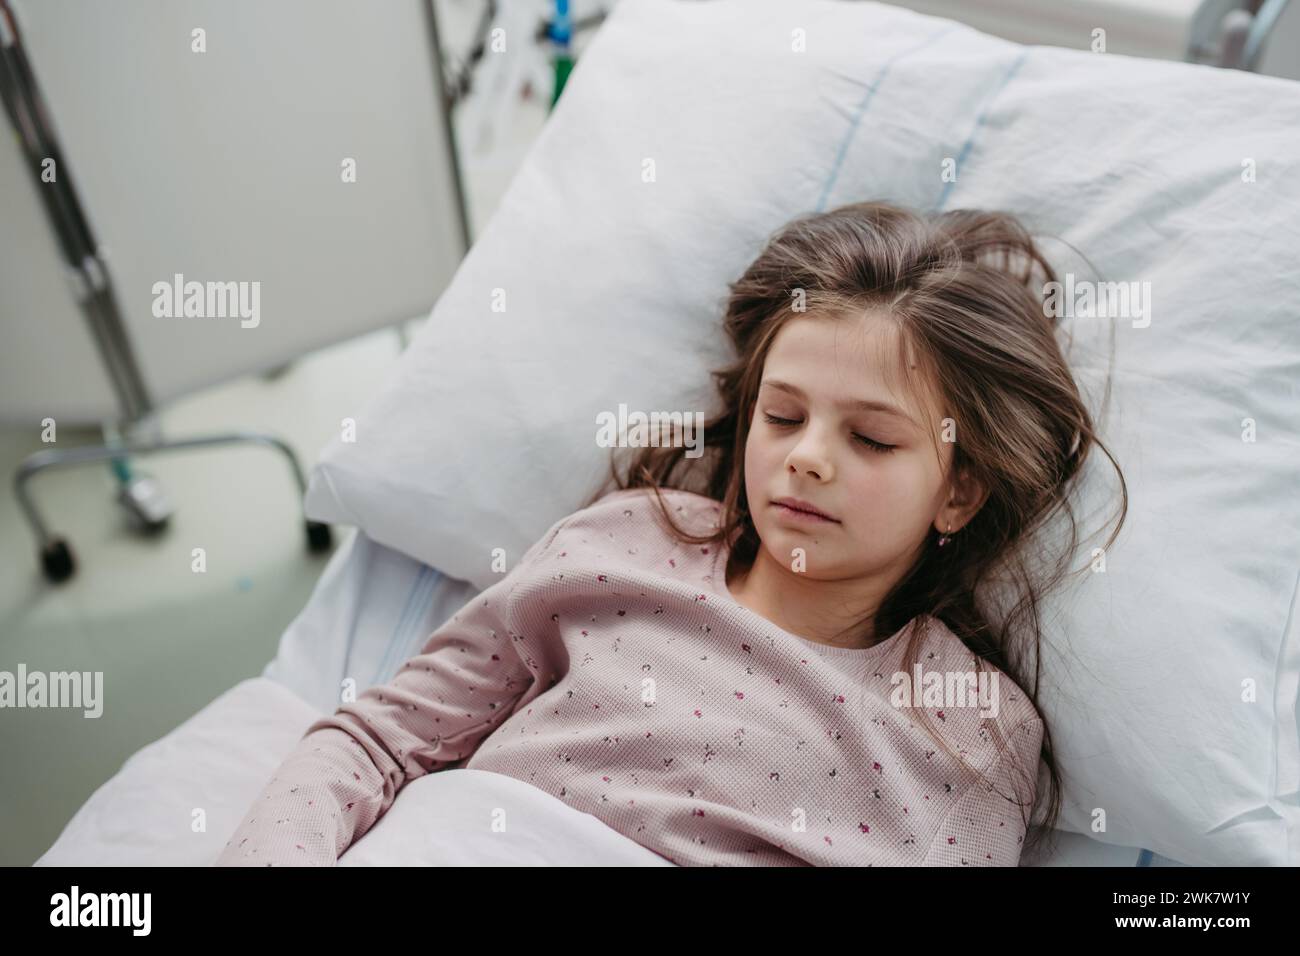 Little girl patient lying in hospital bed. Children in intensive care unit in hospital sleeping. Stock Photo